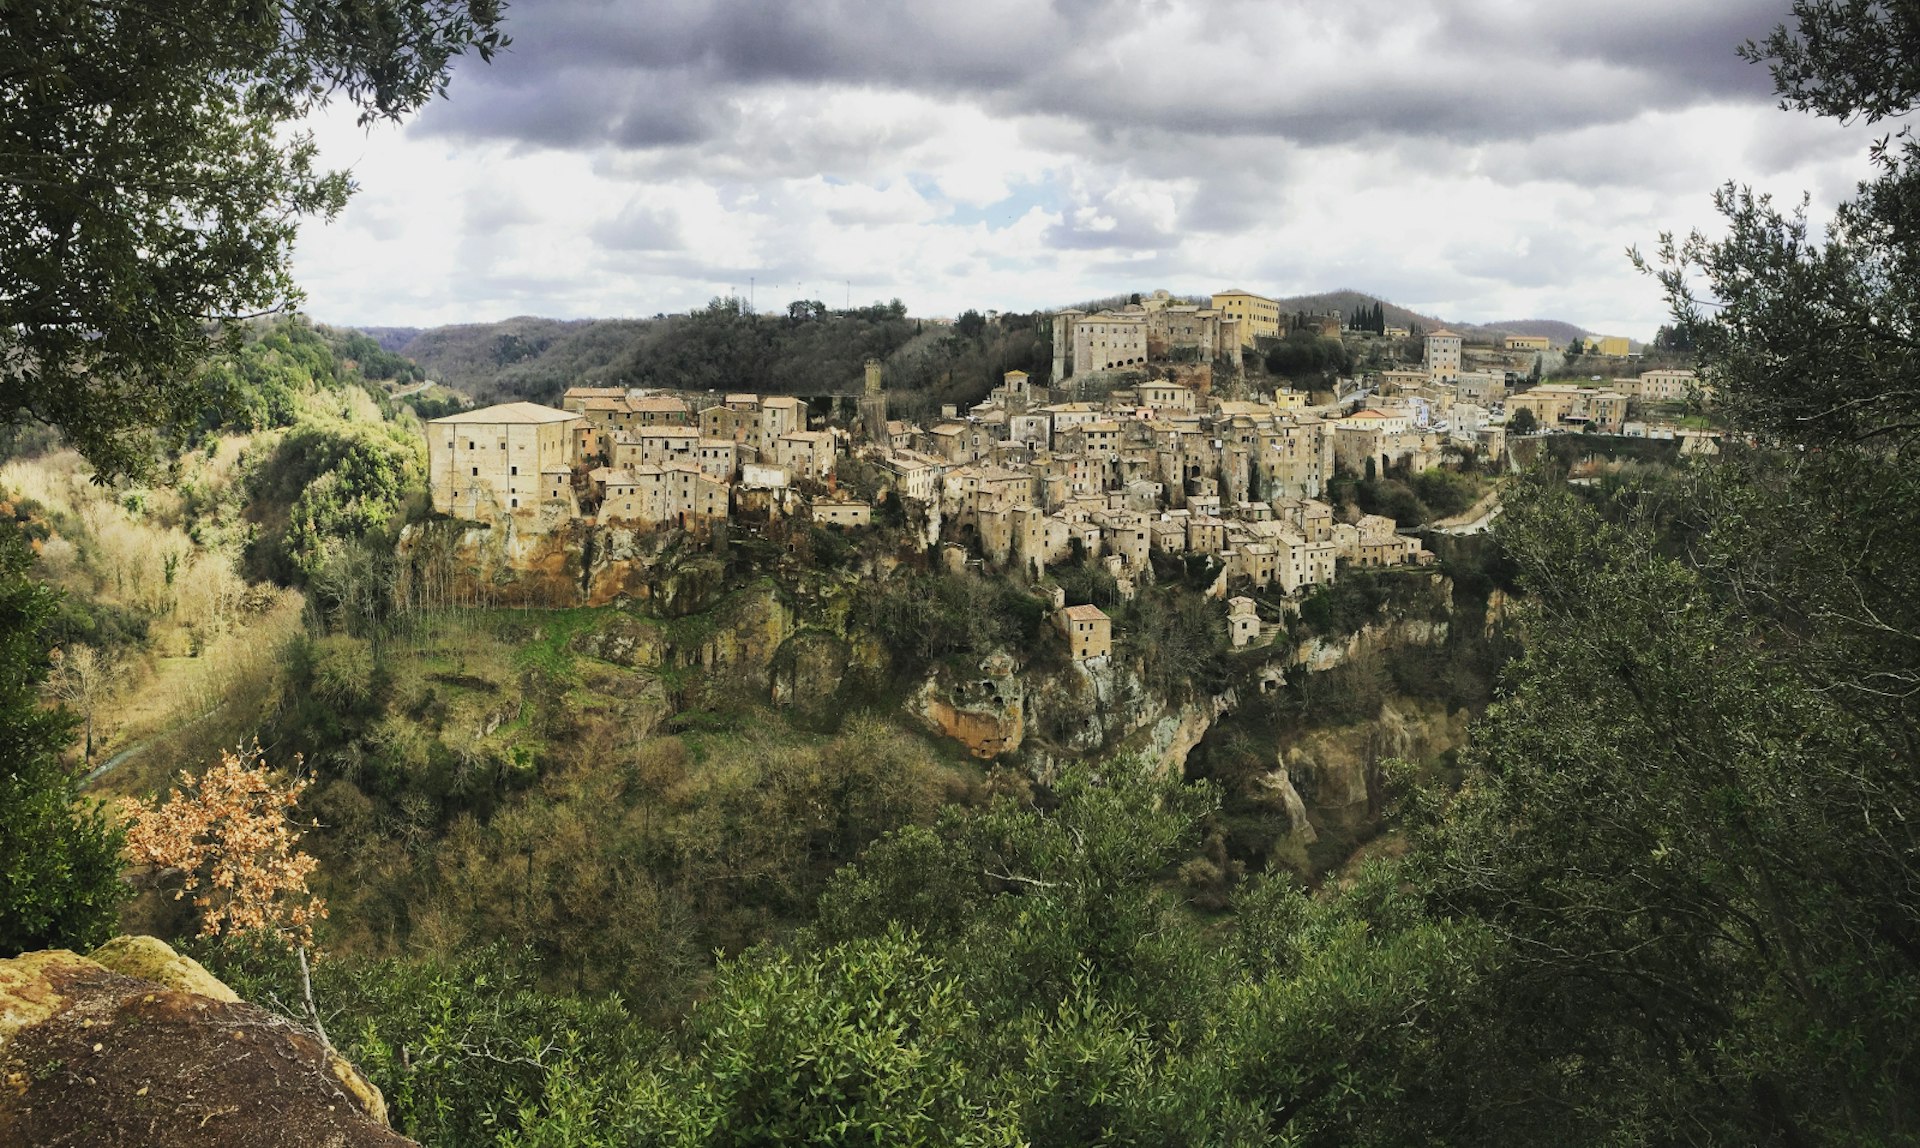 The image is looking over a green, forested gorge to the grey stone buildings of Sorano protruding from the trees and poking into a cloudy sky © Matt Phillips / Lonely Planet